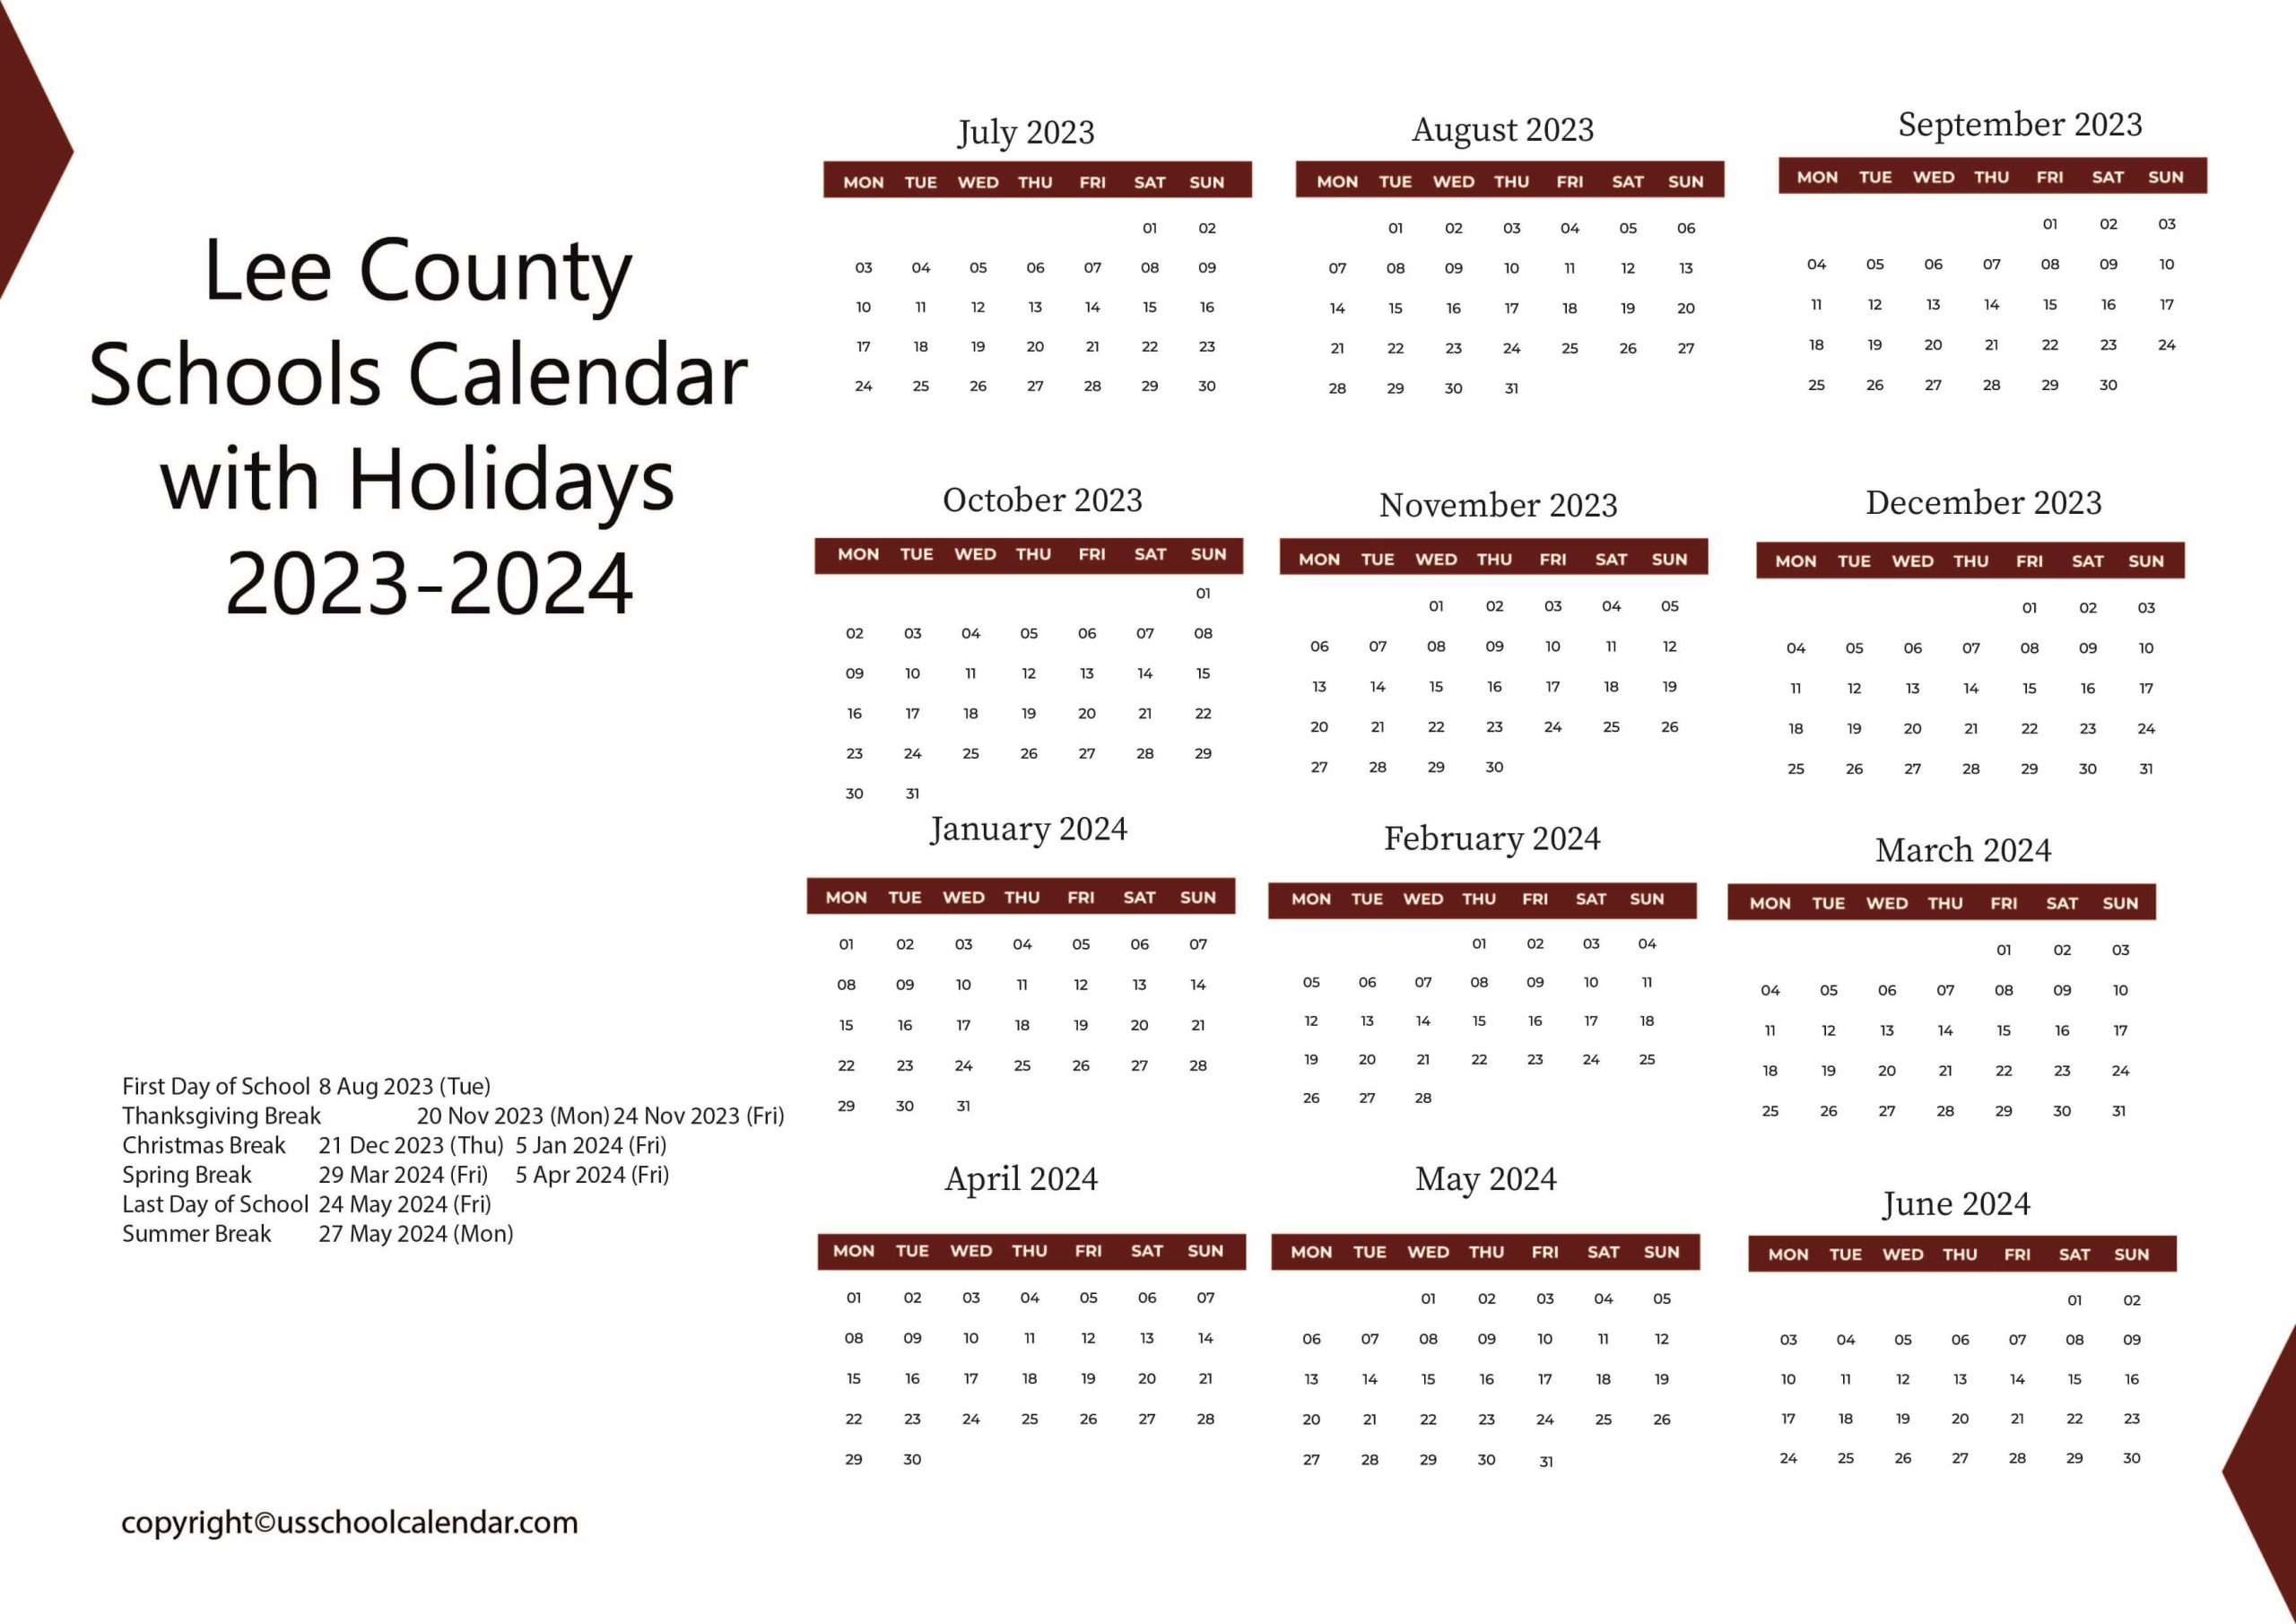 Lee County Schools Calendar with Holidays 2023-2024